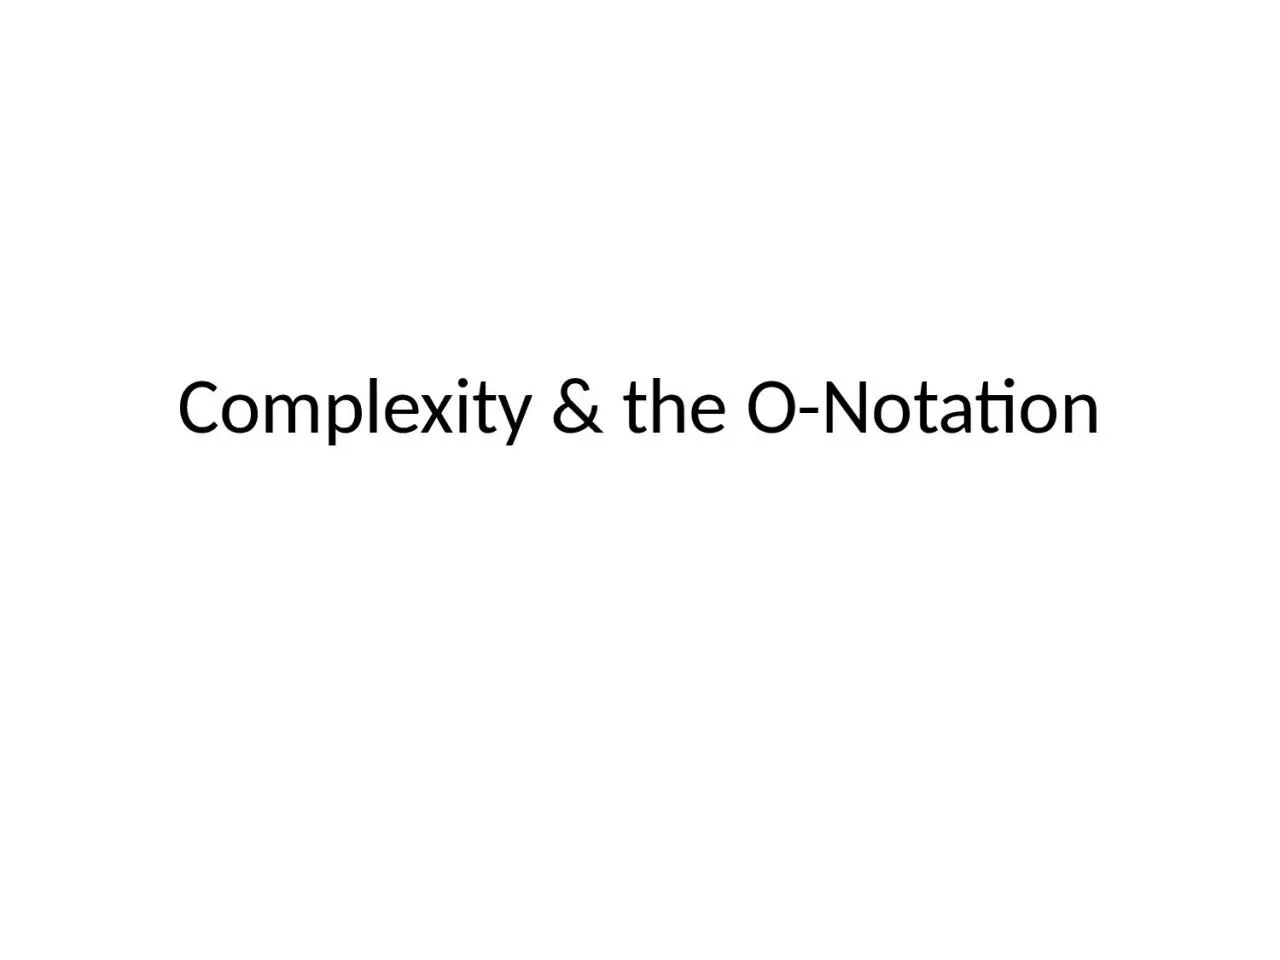 Complexity & the O-Notation